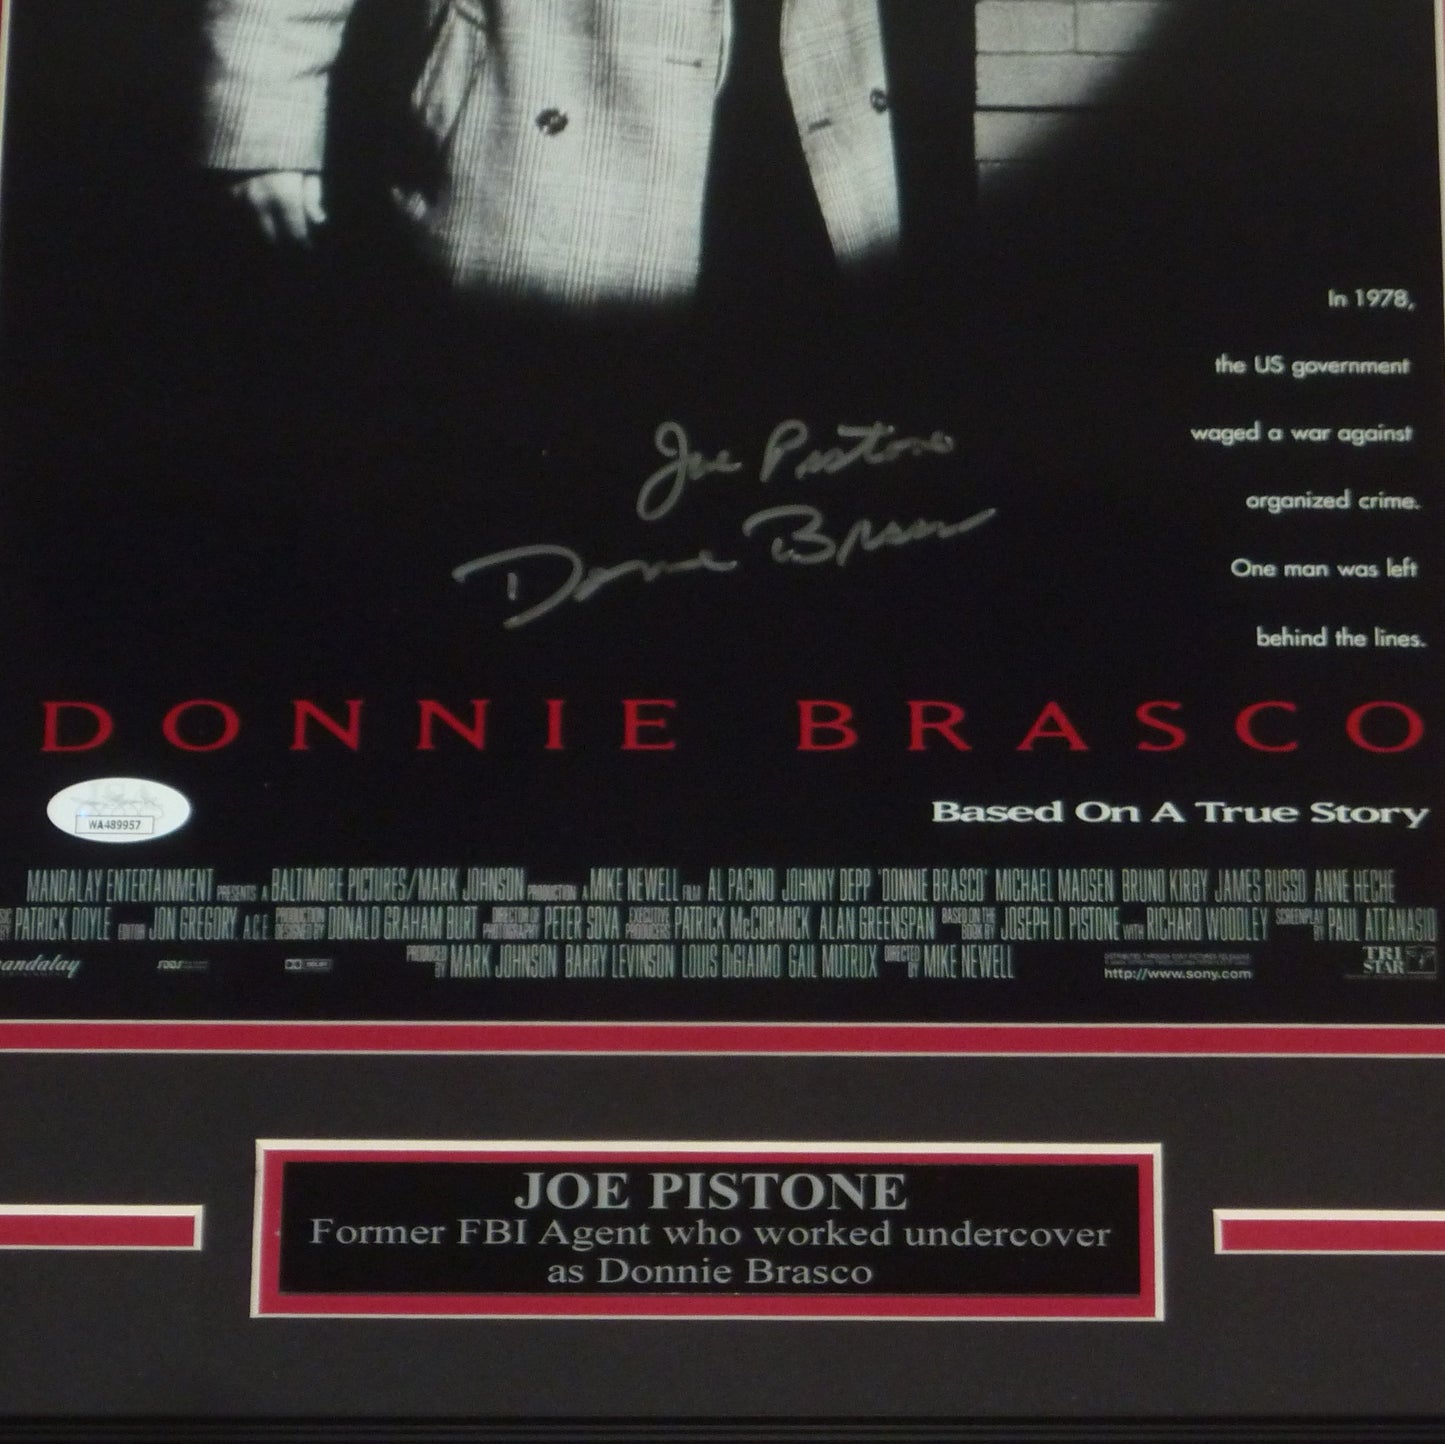 Joseph Pistone Autographed Donnie Brasco Deluxe Framed 11x17 Movie Poster – The Real Donnie Brasco - JSA